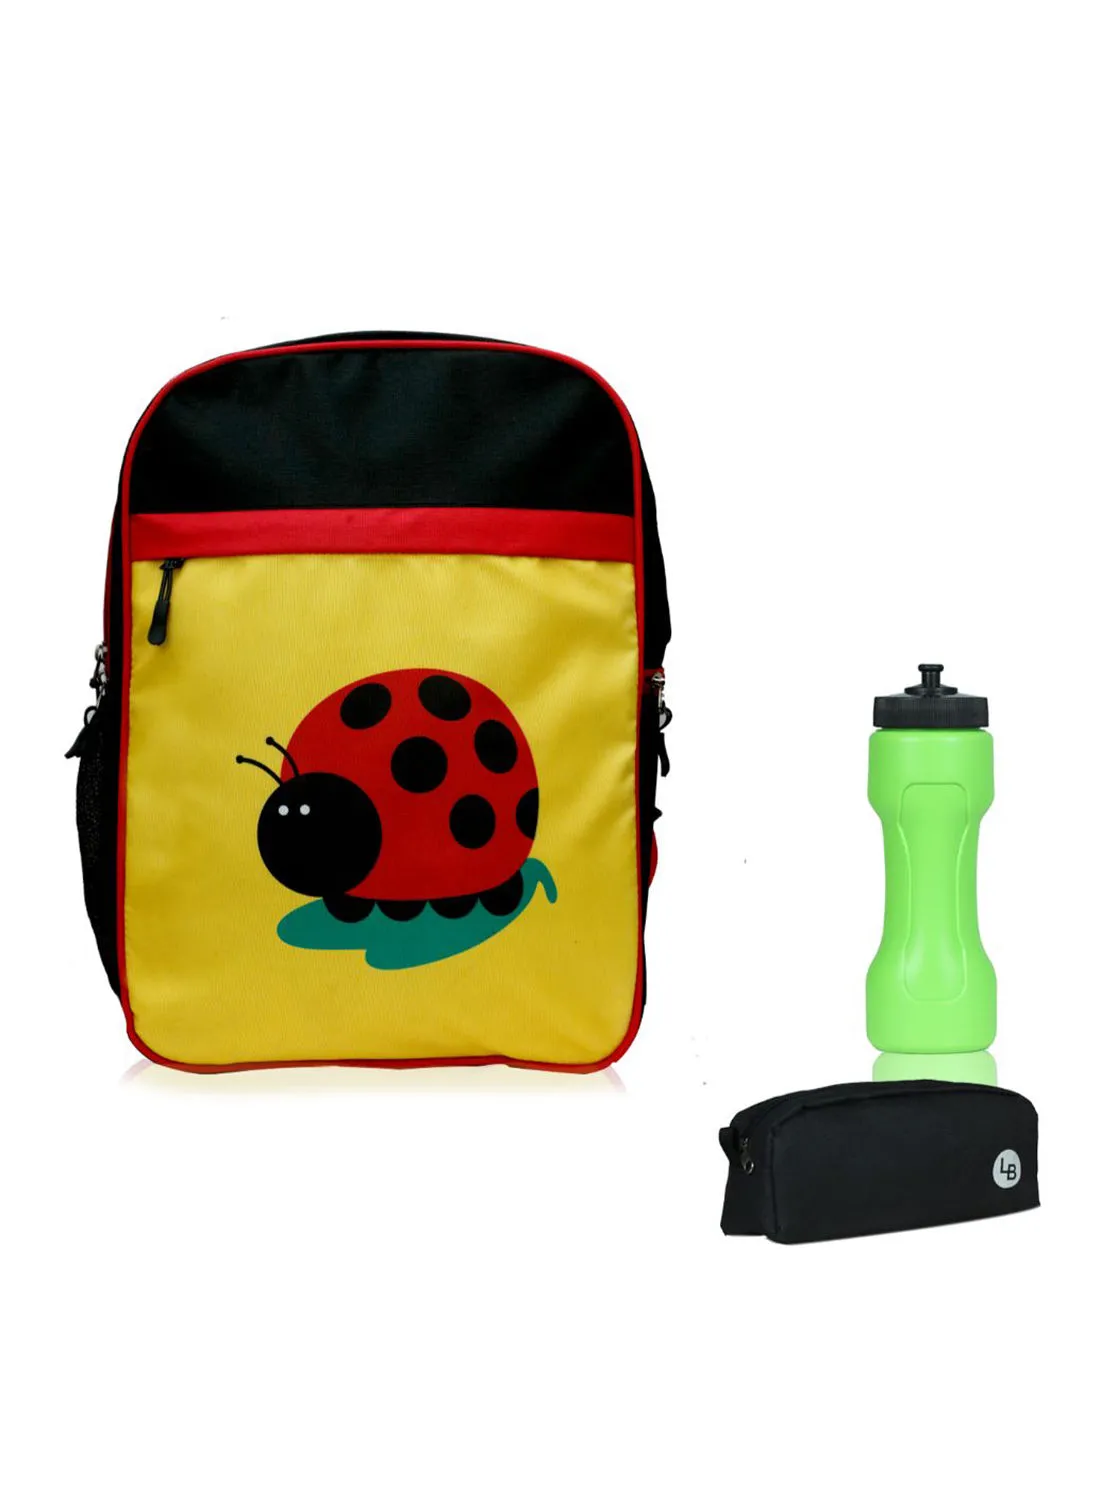 LIONBONE Ladybug Printed Polyester Kids Backpack with zip closure Ideal for 6-8 years age group, Plastic Sipper And Polyester Pouch Yellow/Black/Green